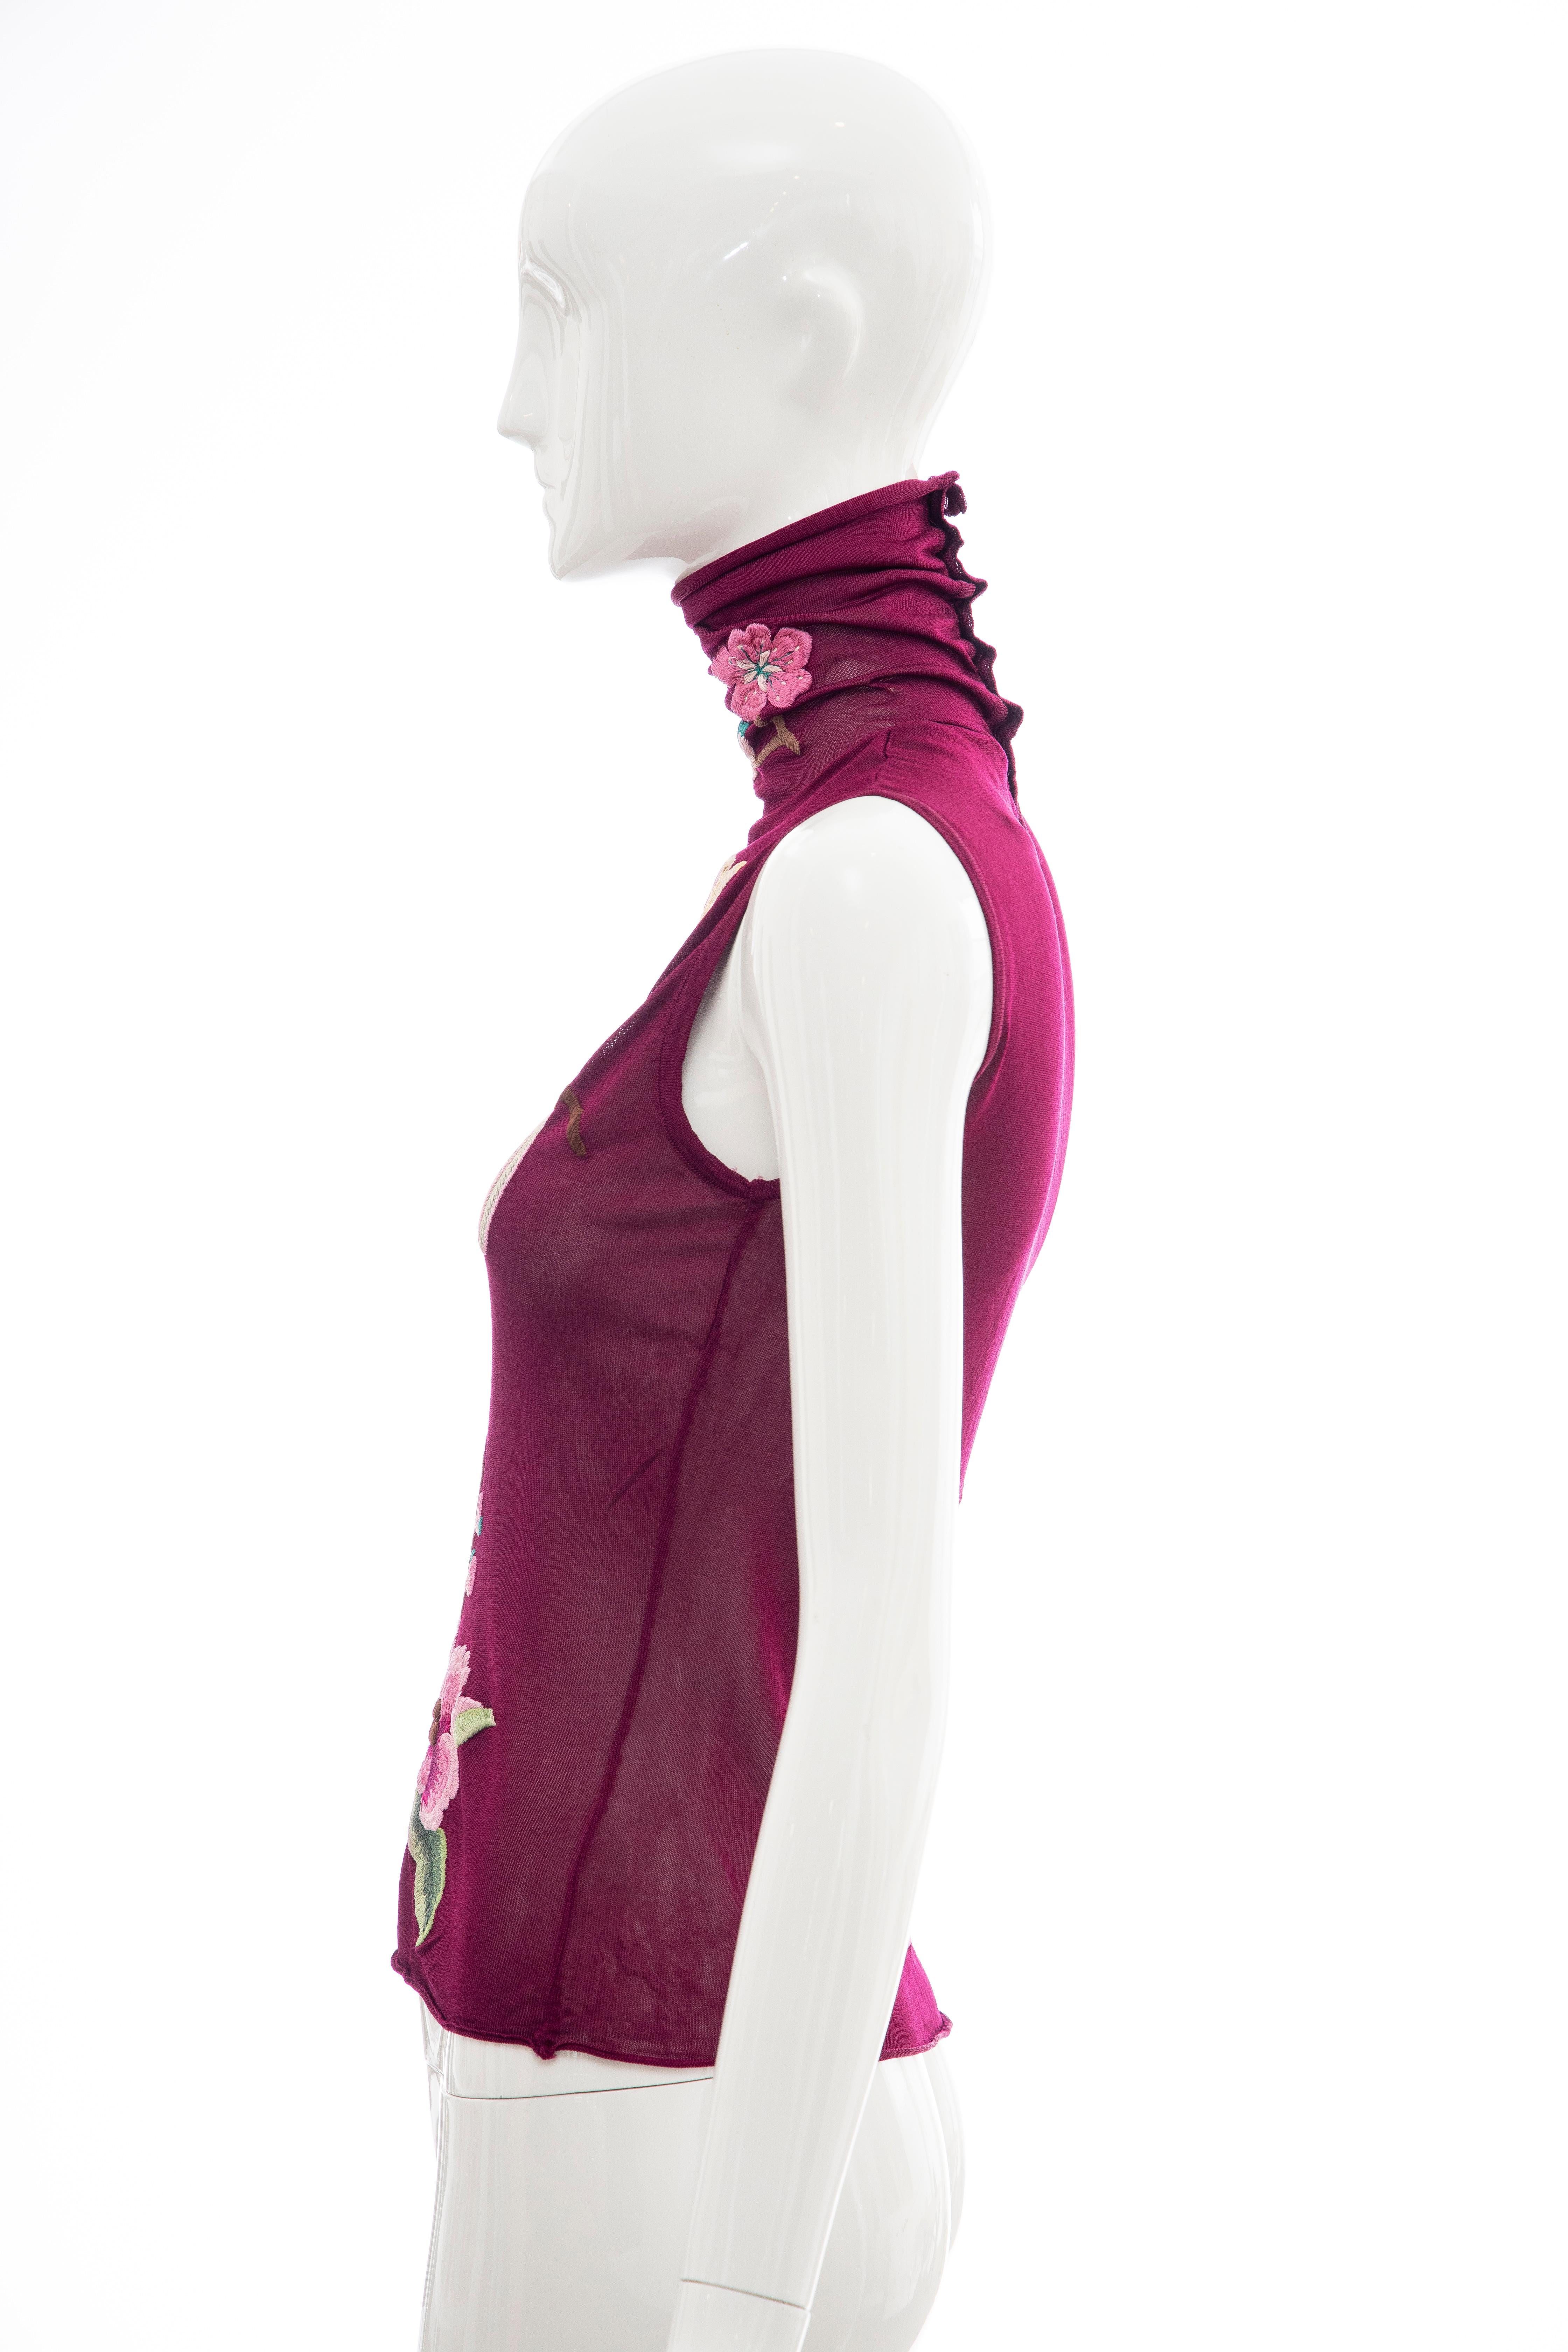 John Galliano for Christian Dior Embroidered Sleeveless Top, Fall 2003 3